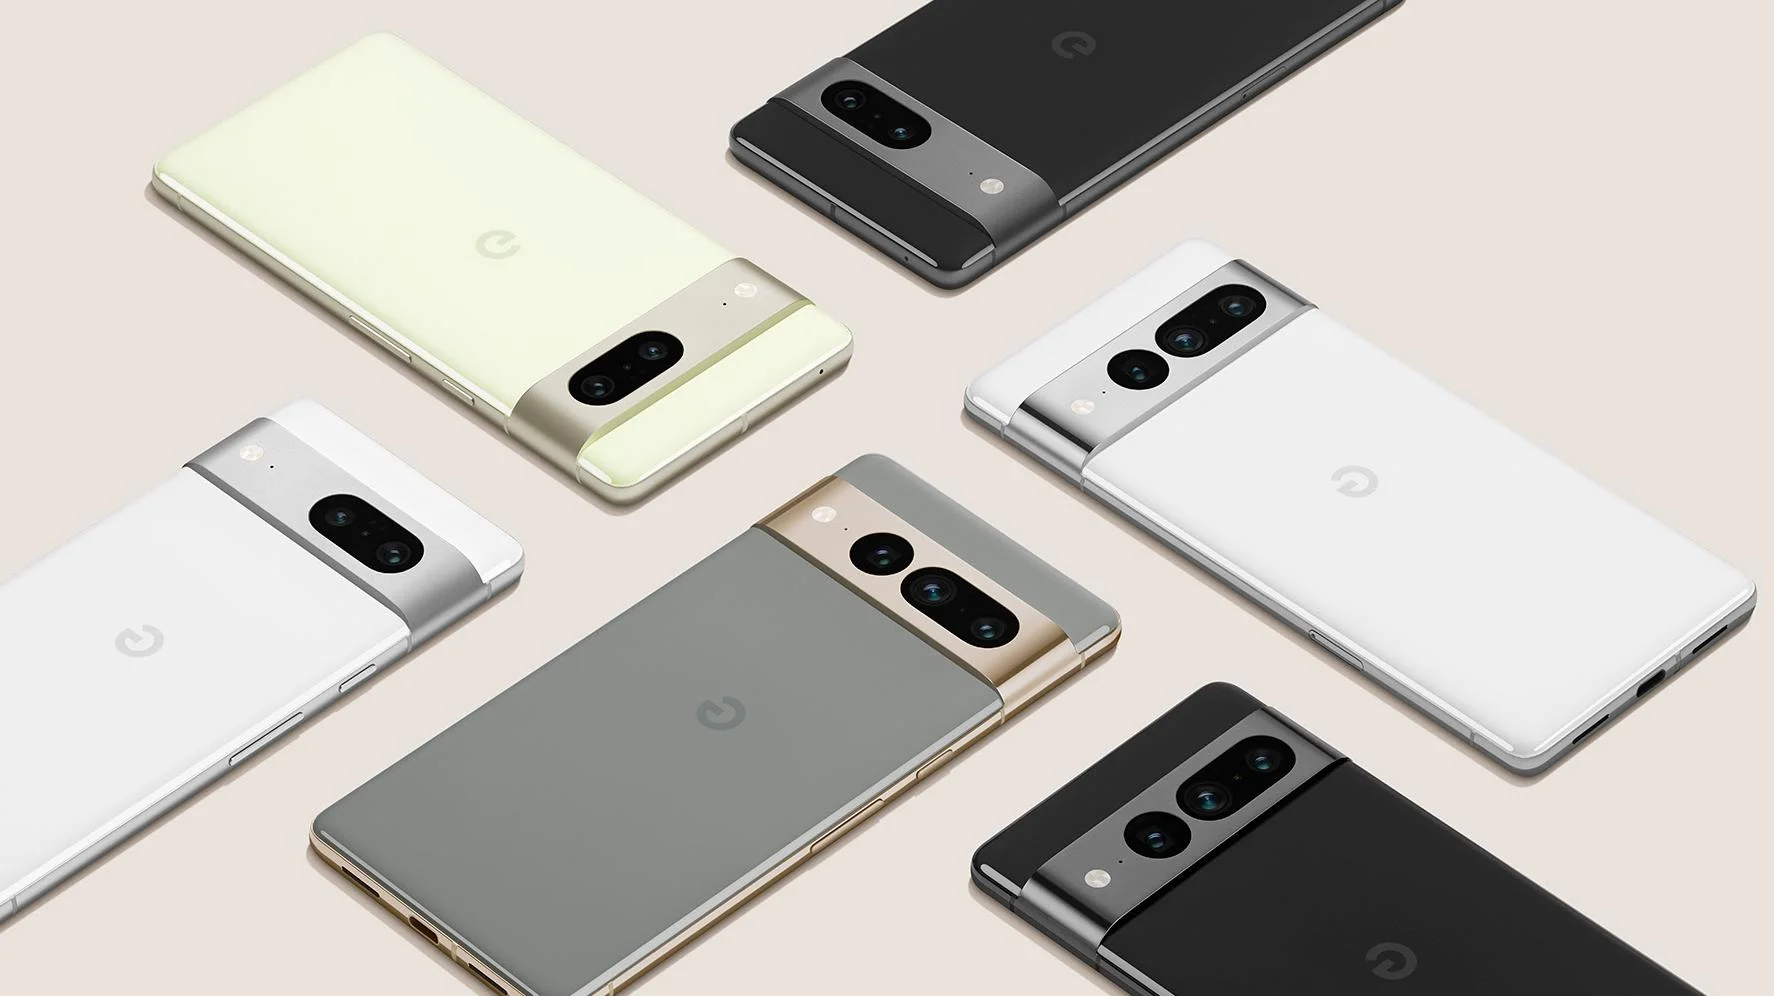 The design of the yet unannounced Pixel 7 Pro was shown in the photo